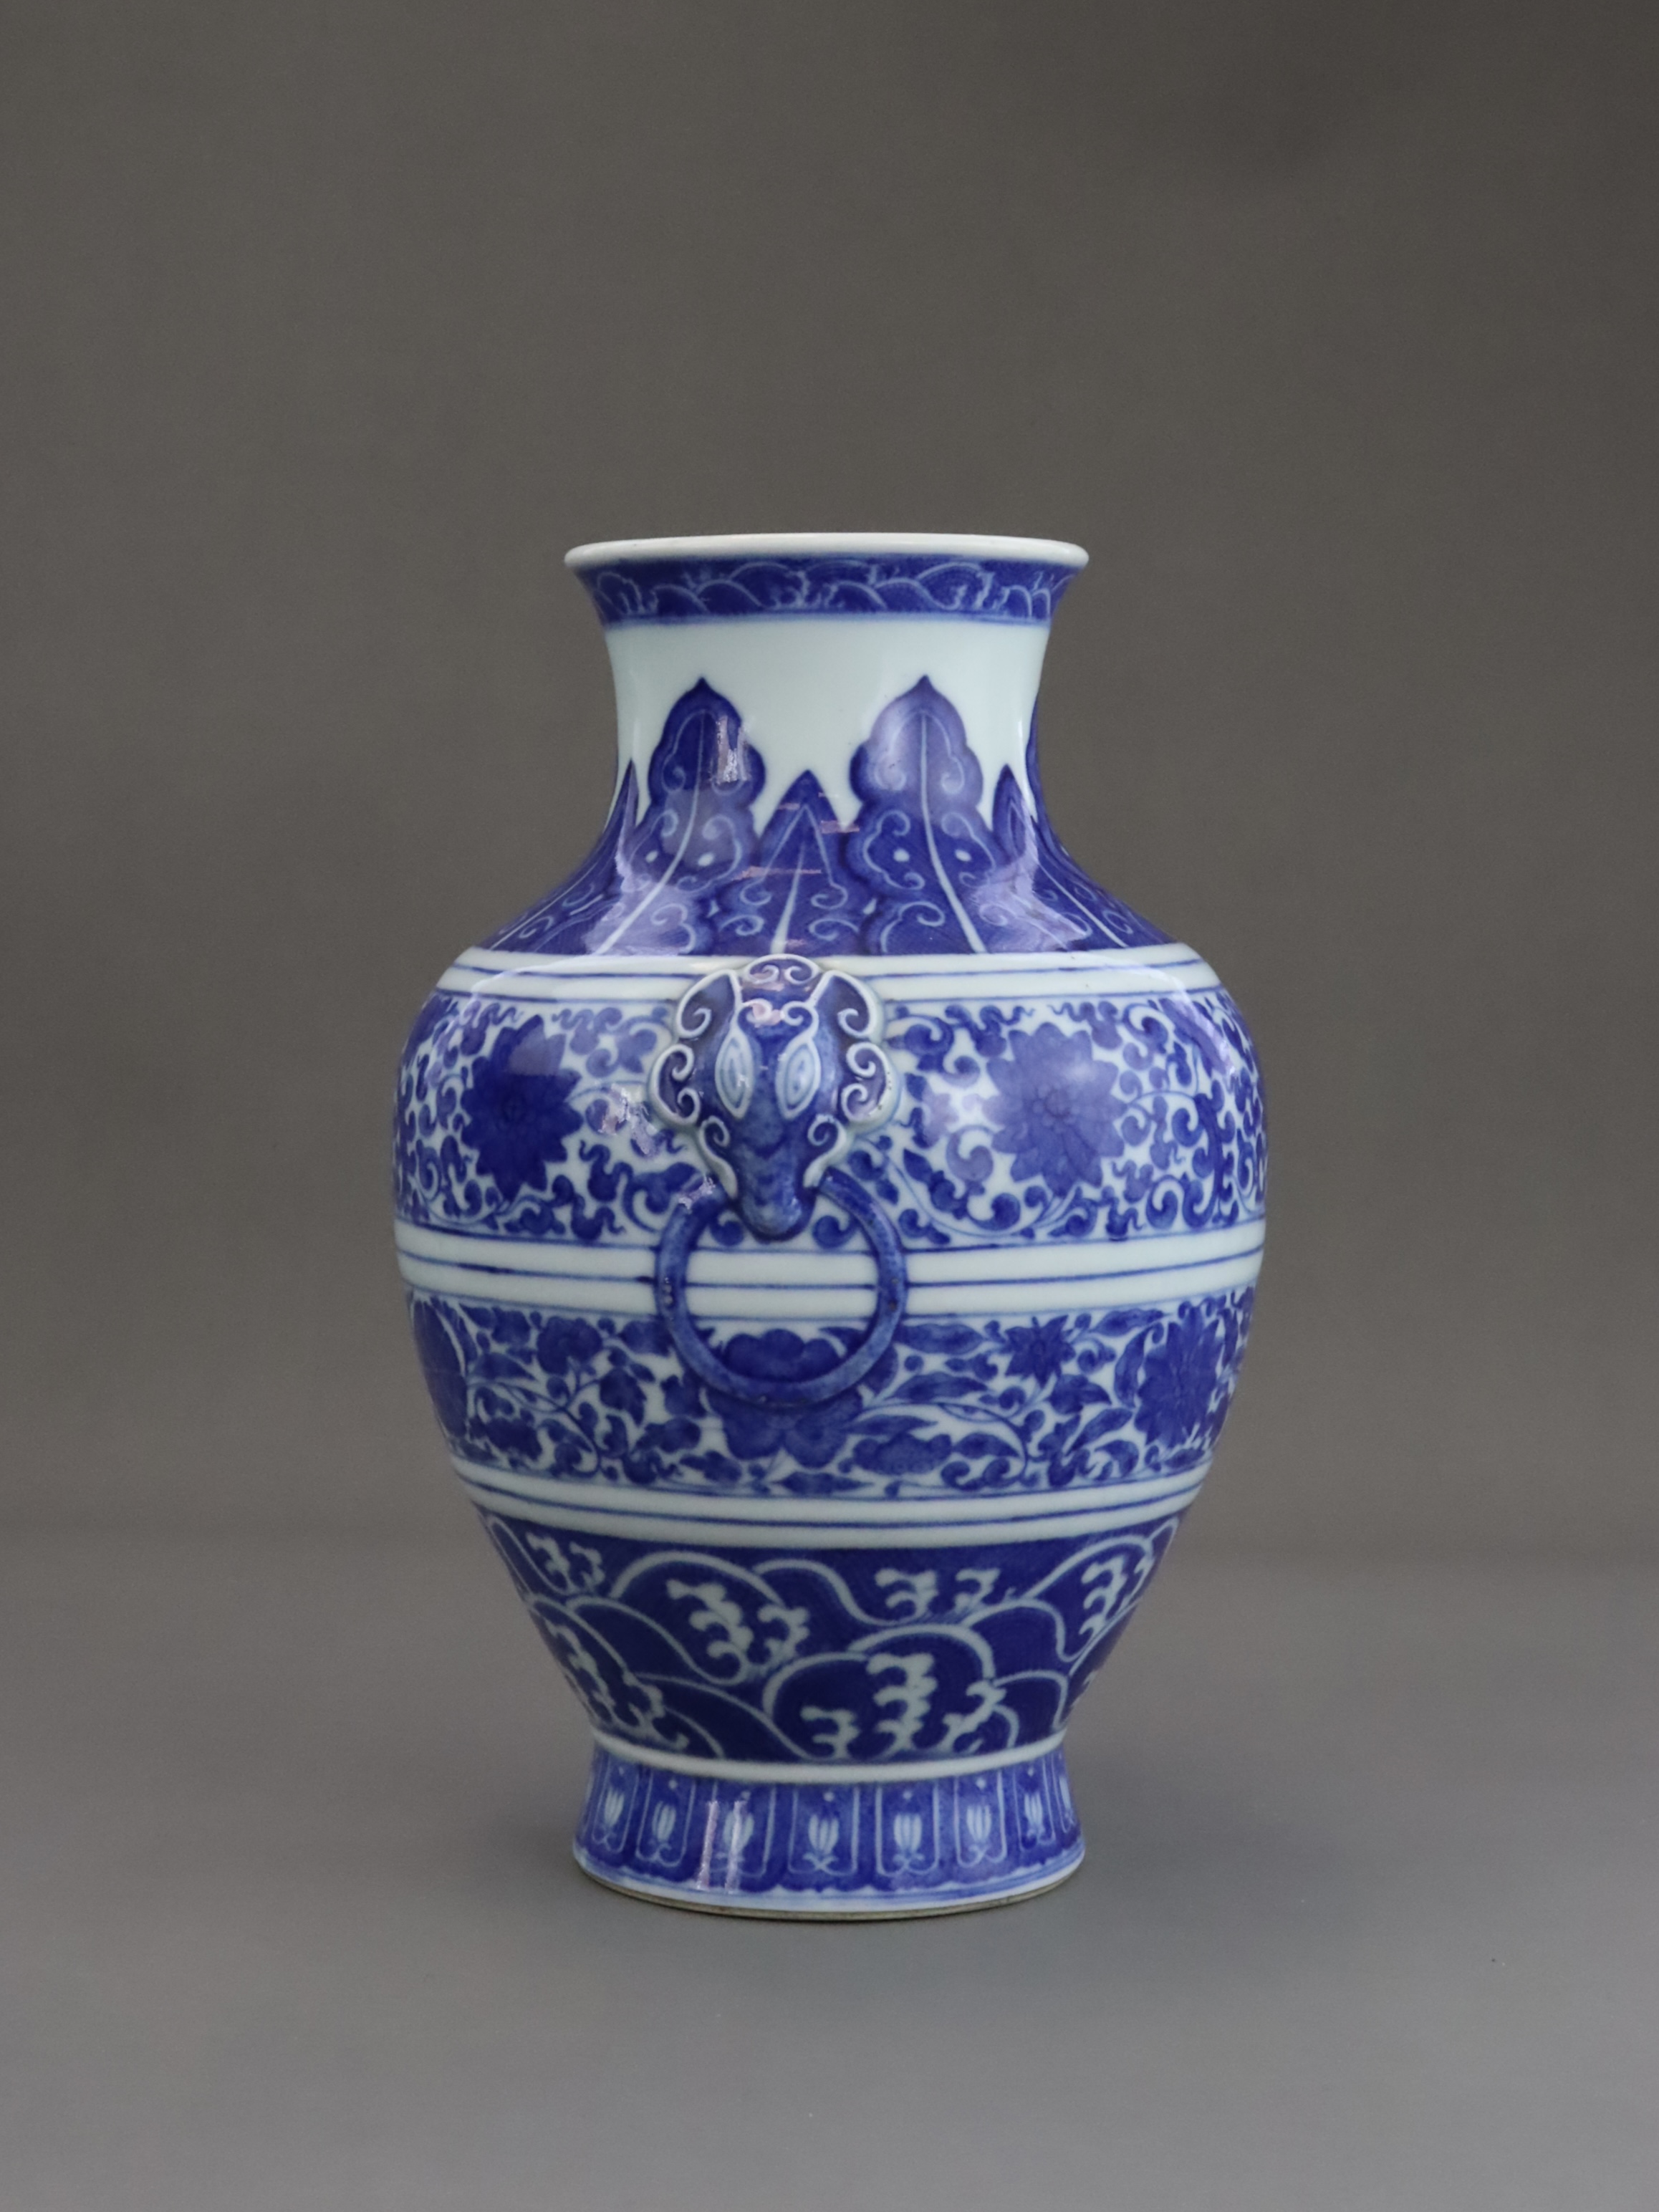 A Good Blue and White Ming style Vase, hu, six character seal mark of Qianlong, Qing dynasty, - Image 3 of 9